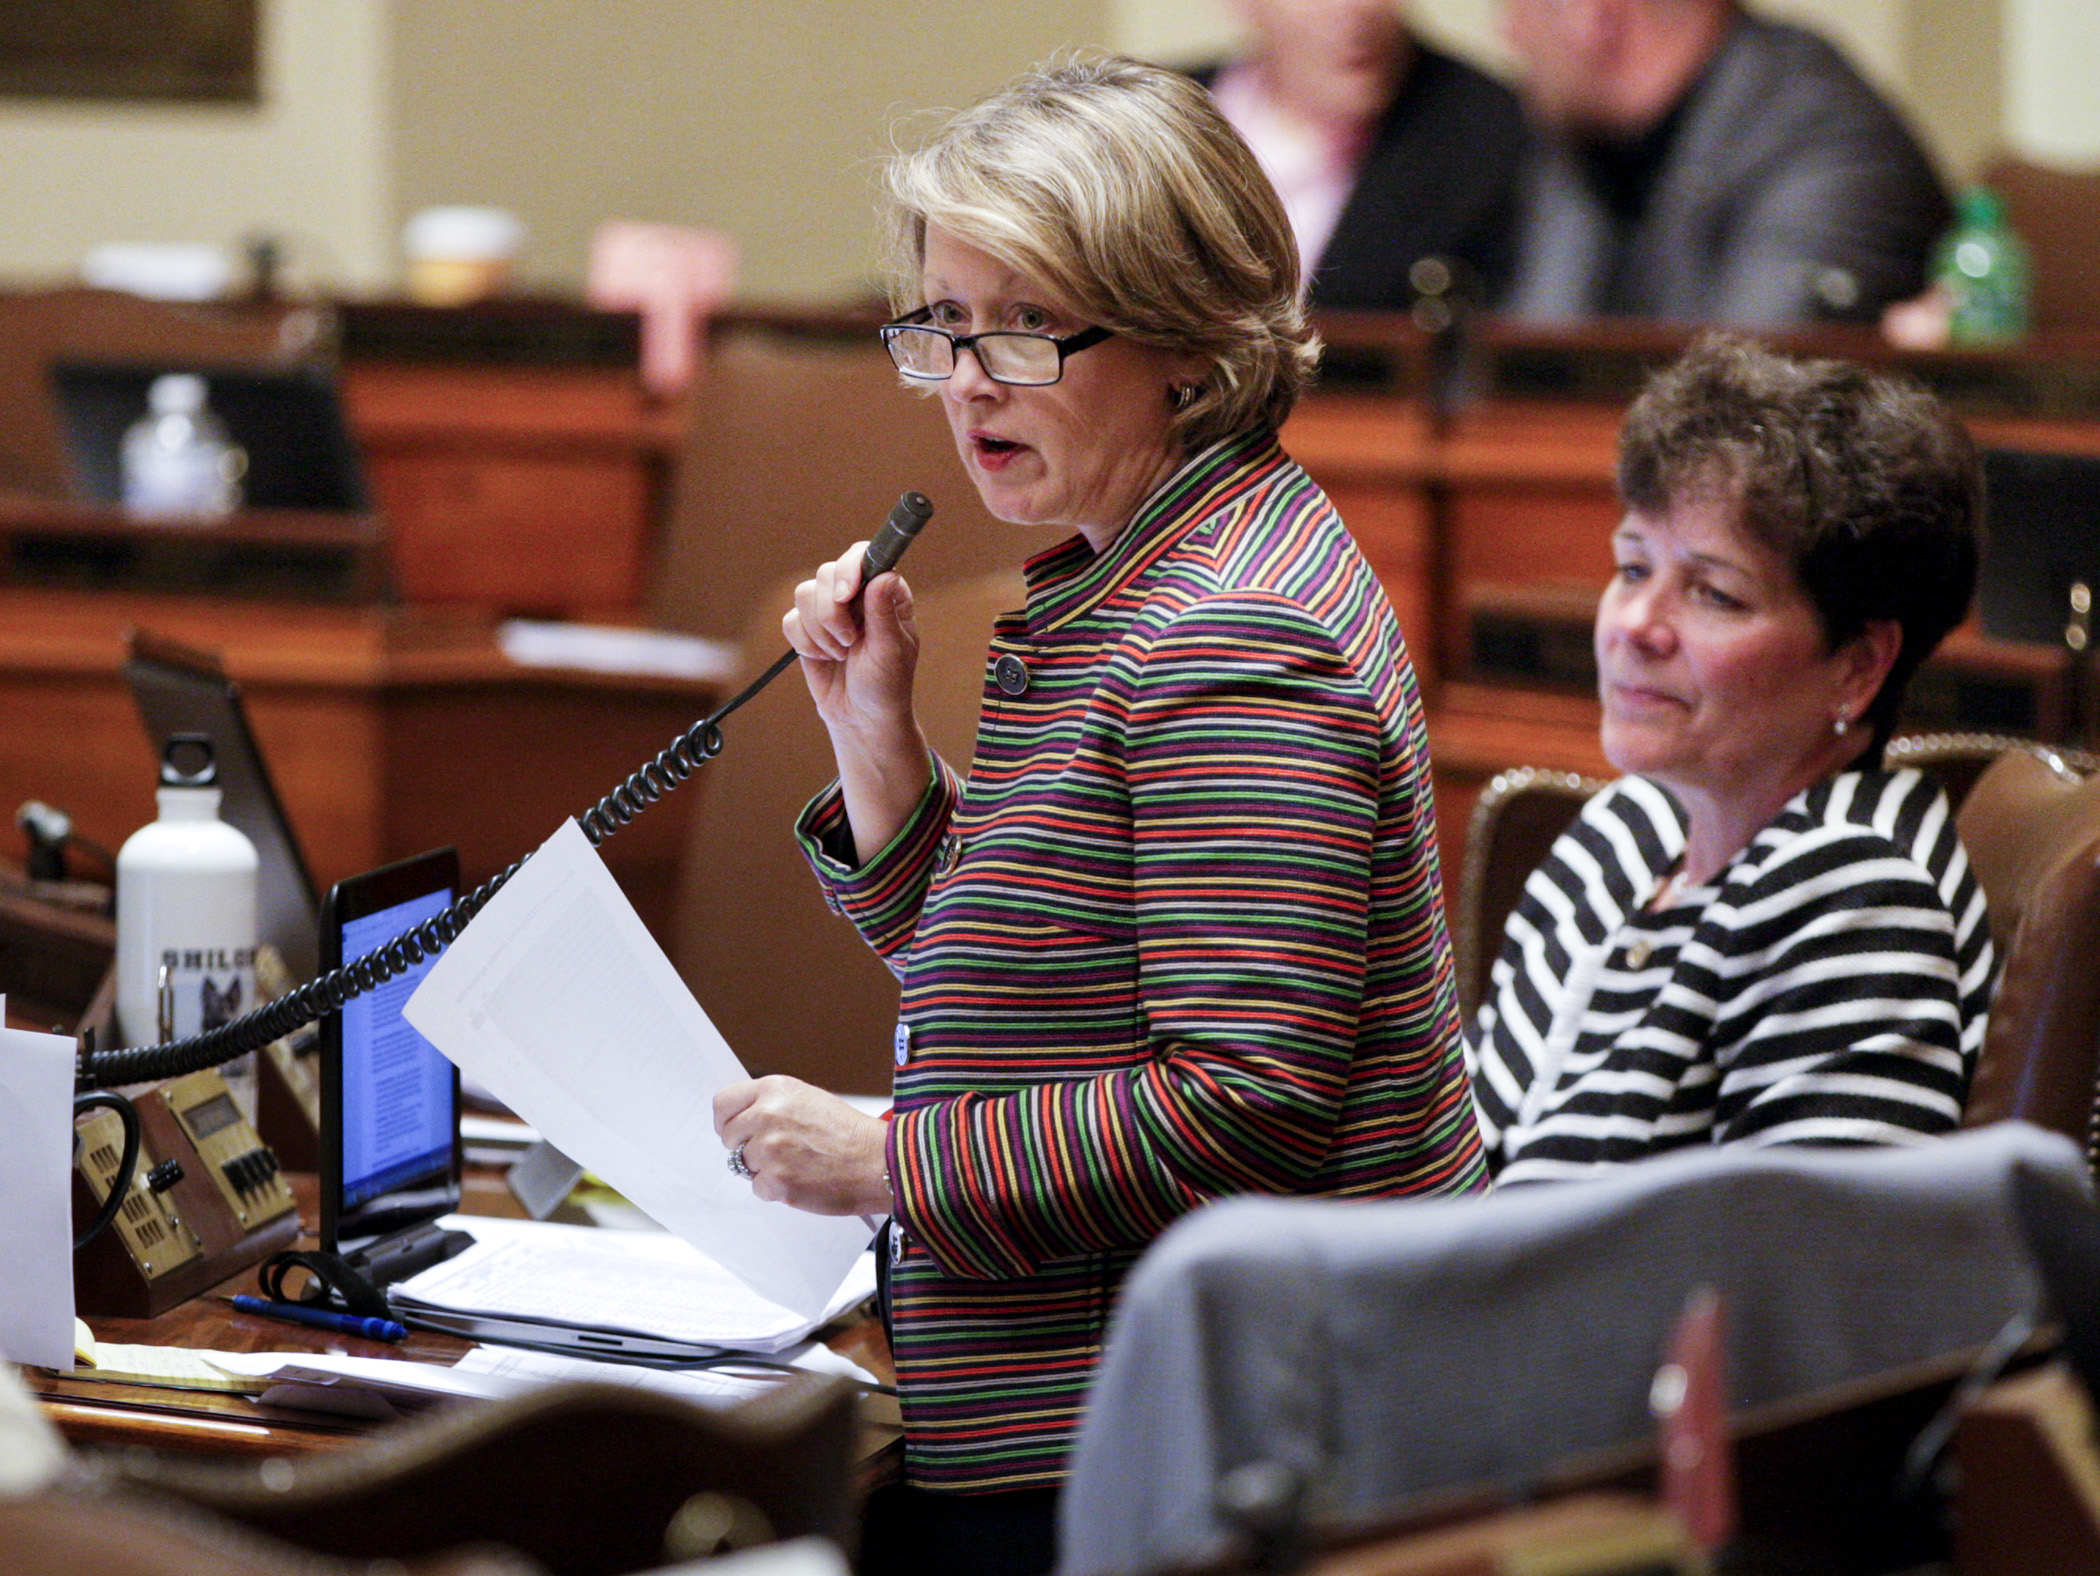 Rep. Jenifer Loon, chair of the House Education Finance Committee, explains provisions of the conference committee report on HF844 during floor debate May 18. Photo by Paul Battaglia